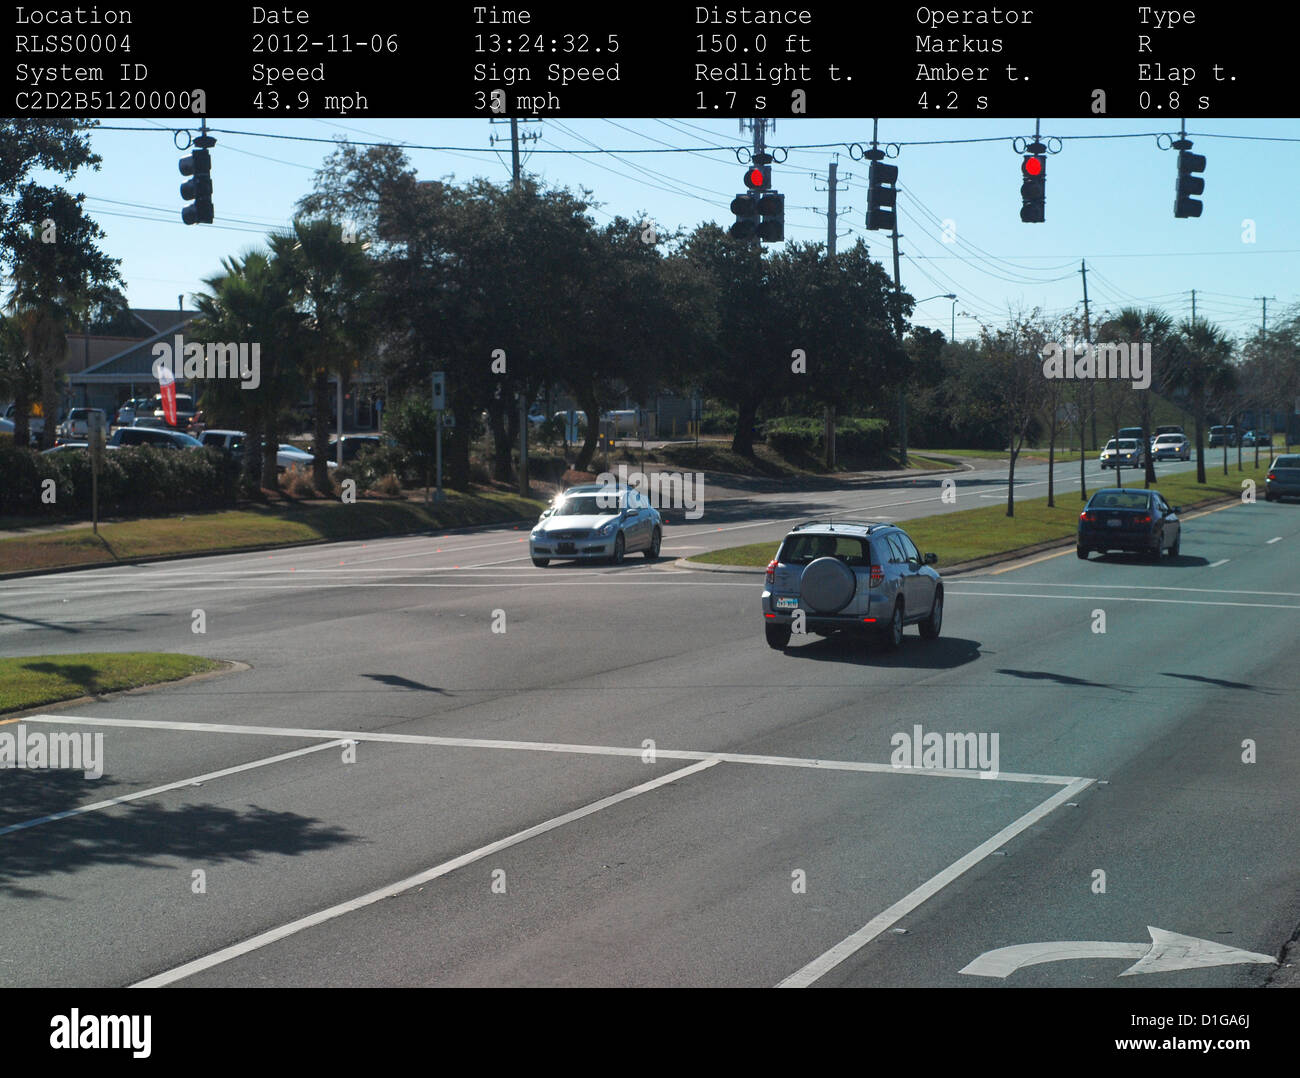 Gulf Breeze Police Department traffic camera photographing a silver Toyota Rav4 running a red light in Gulf Breeze, Florida. Stock Photo